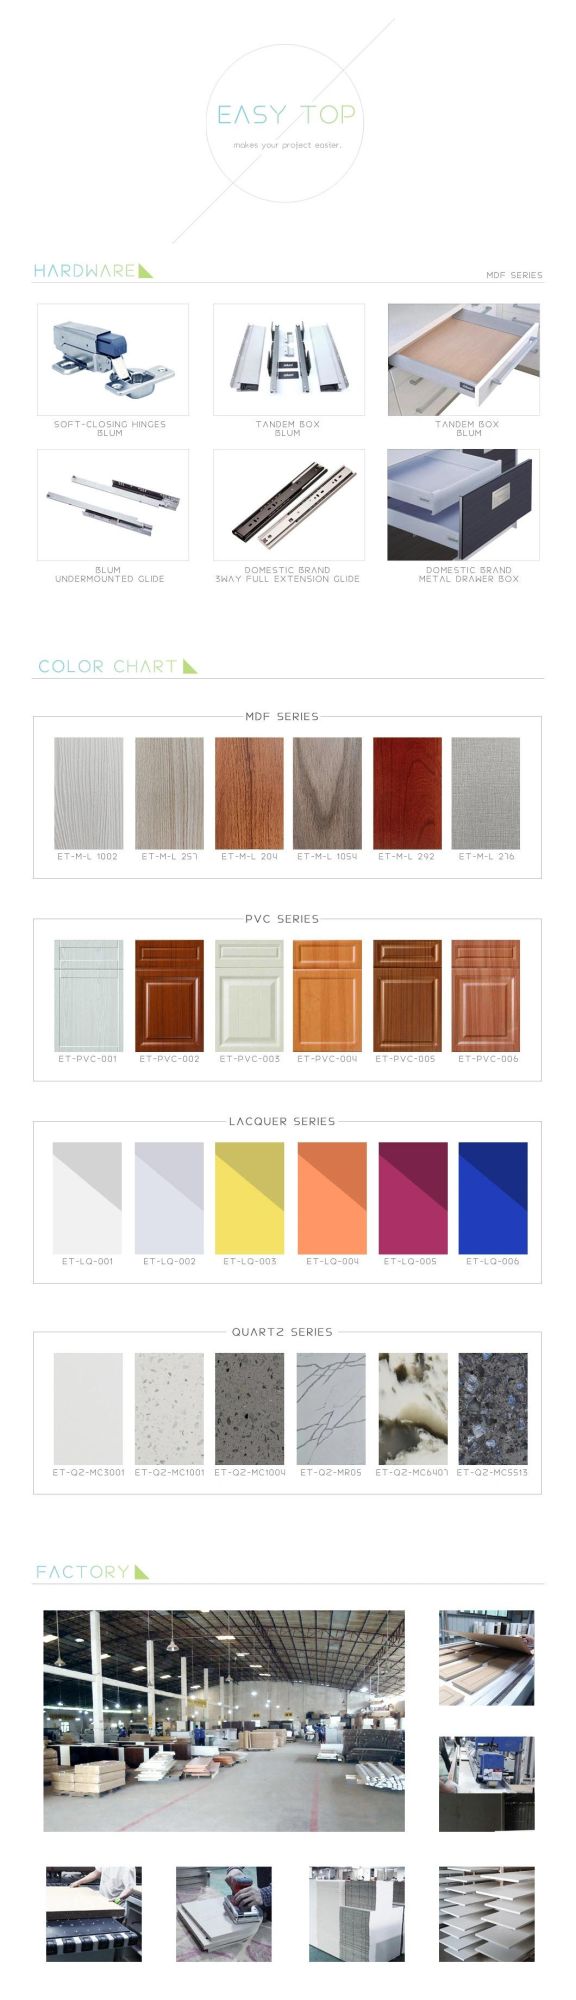 Customized High Quality PVC Door and Quartz Countertop Complete Kitchen Units Cabinets